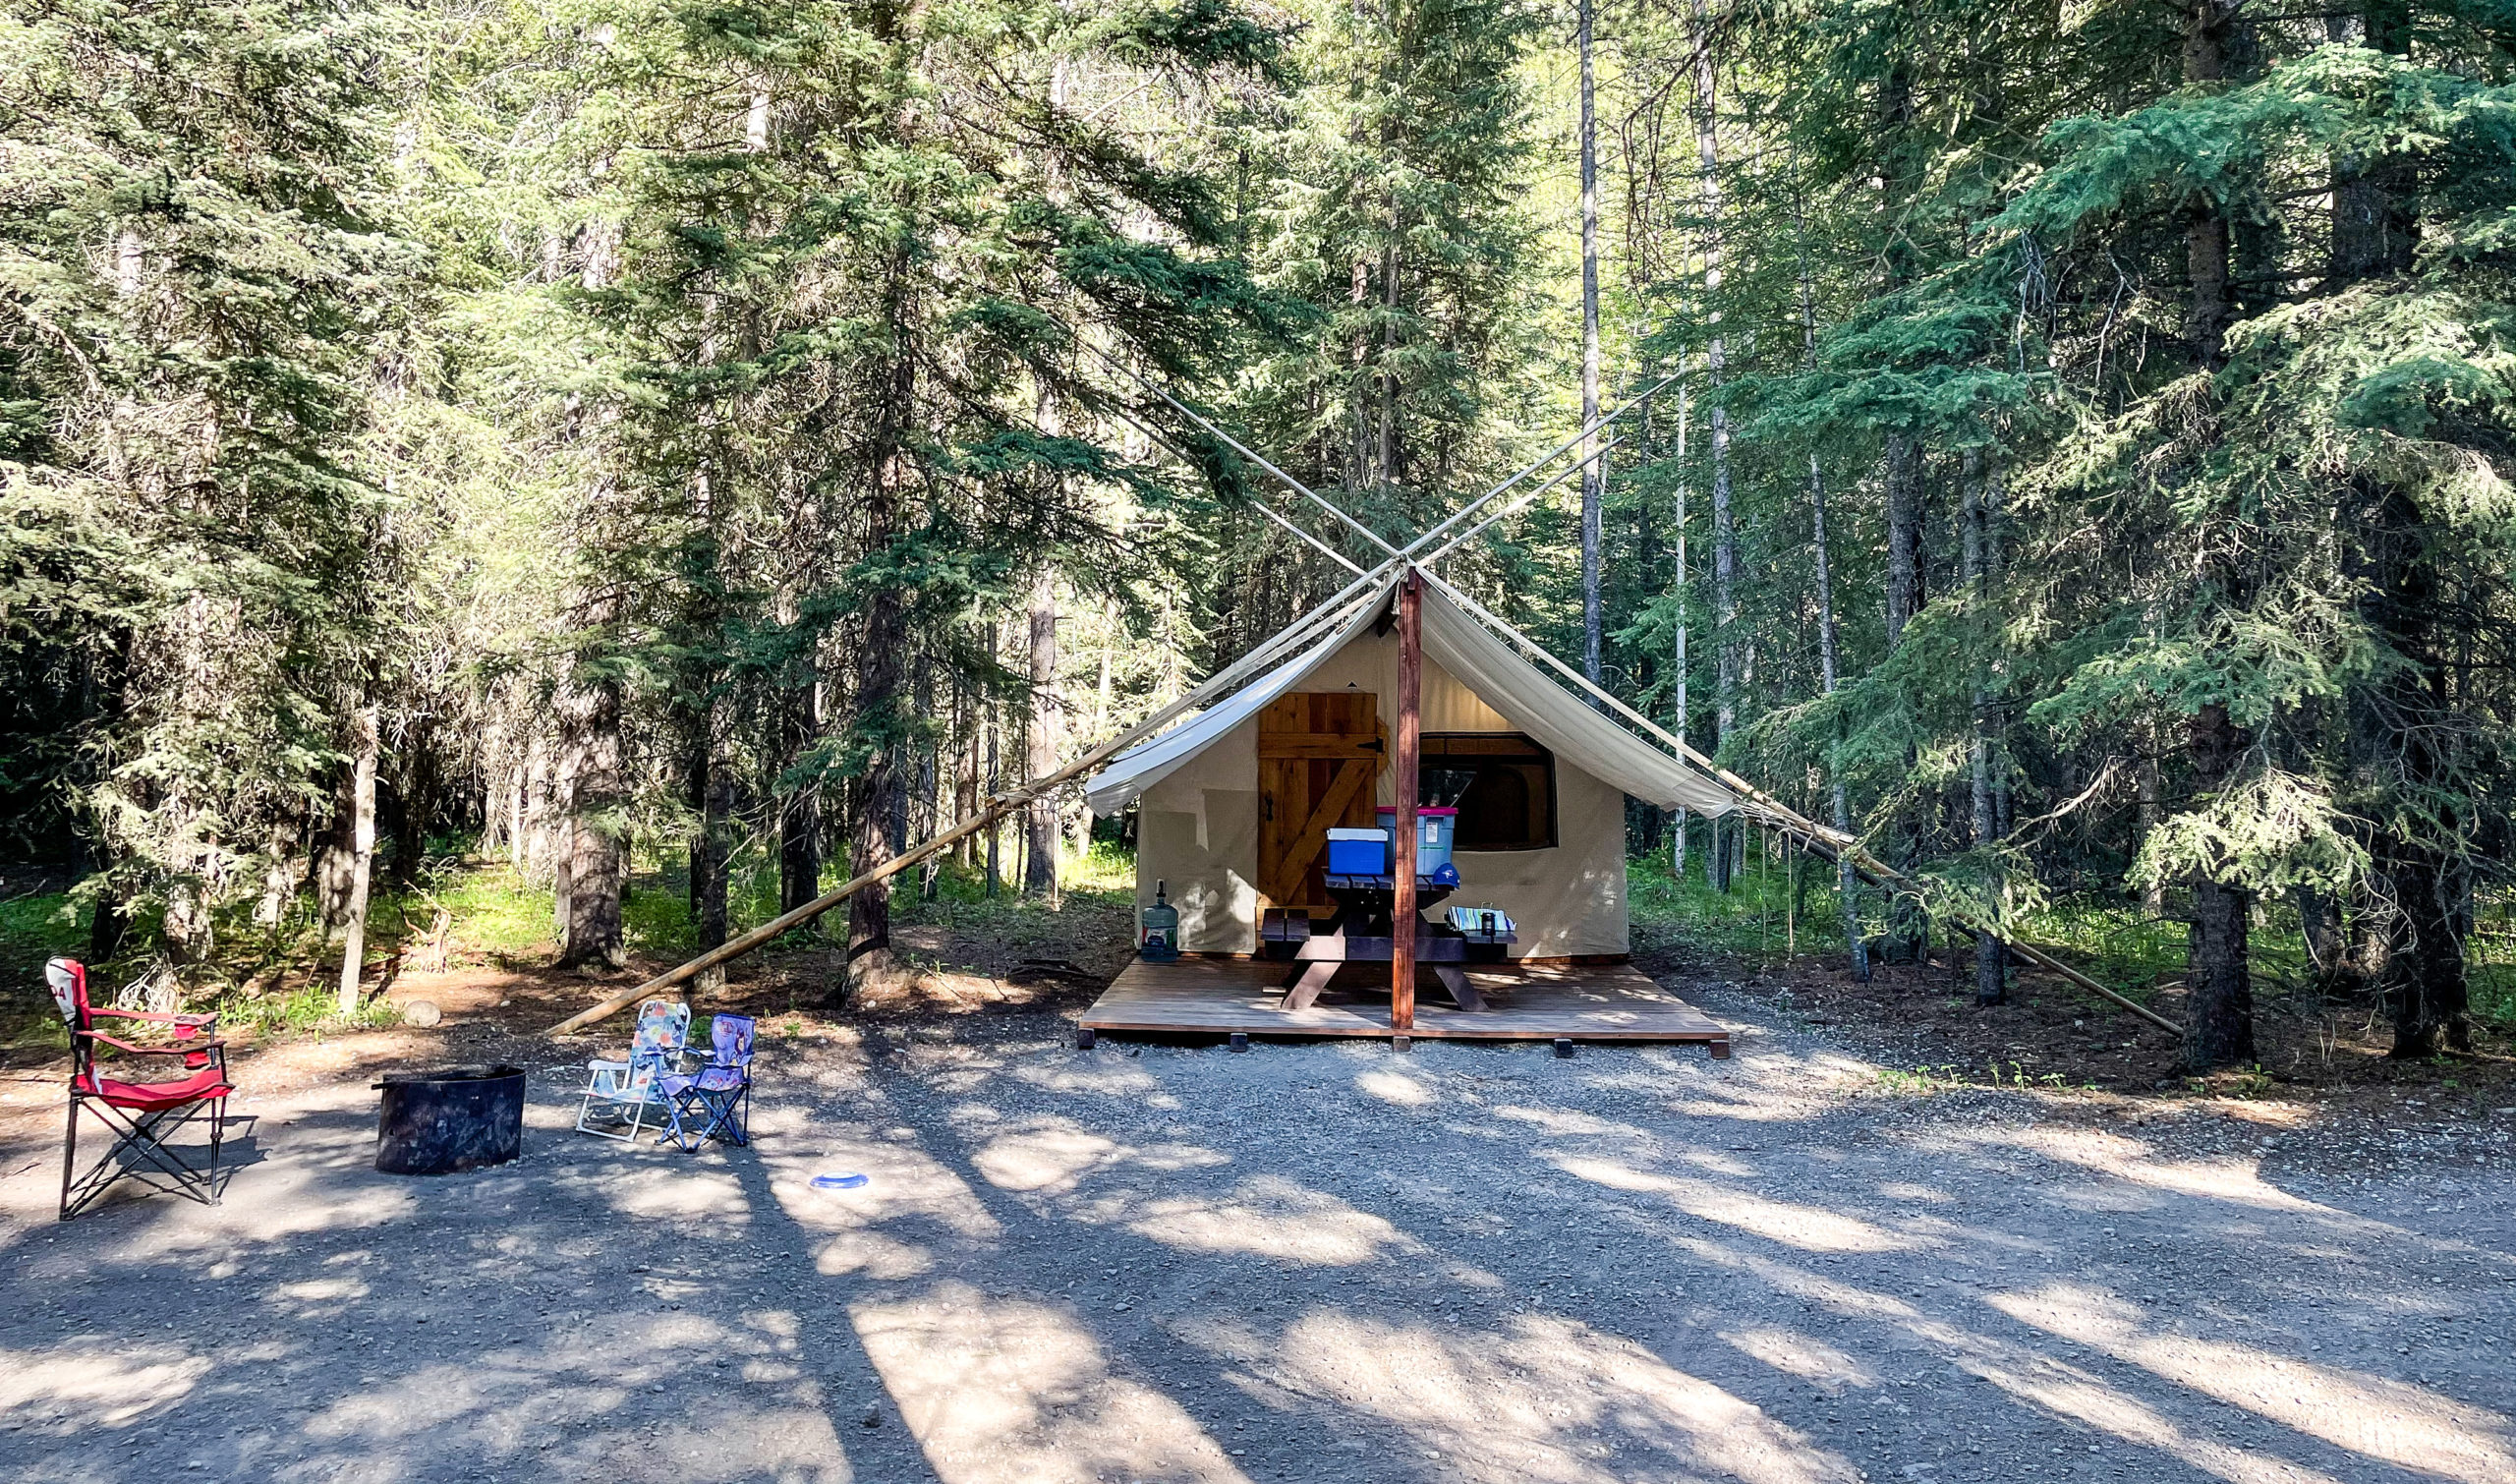 Things To Do With Your Kids: Camping At Sundance Lodges